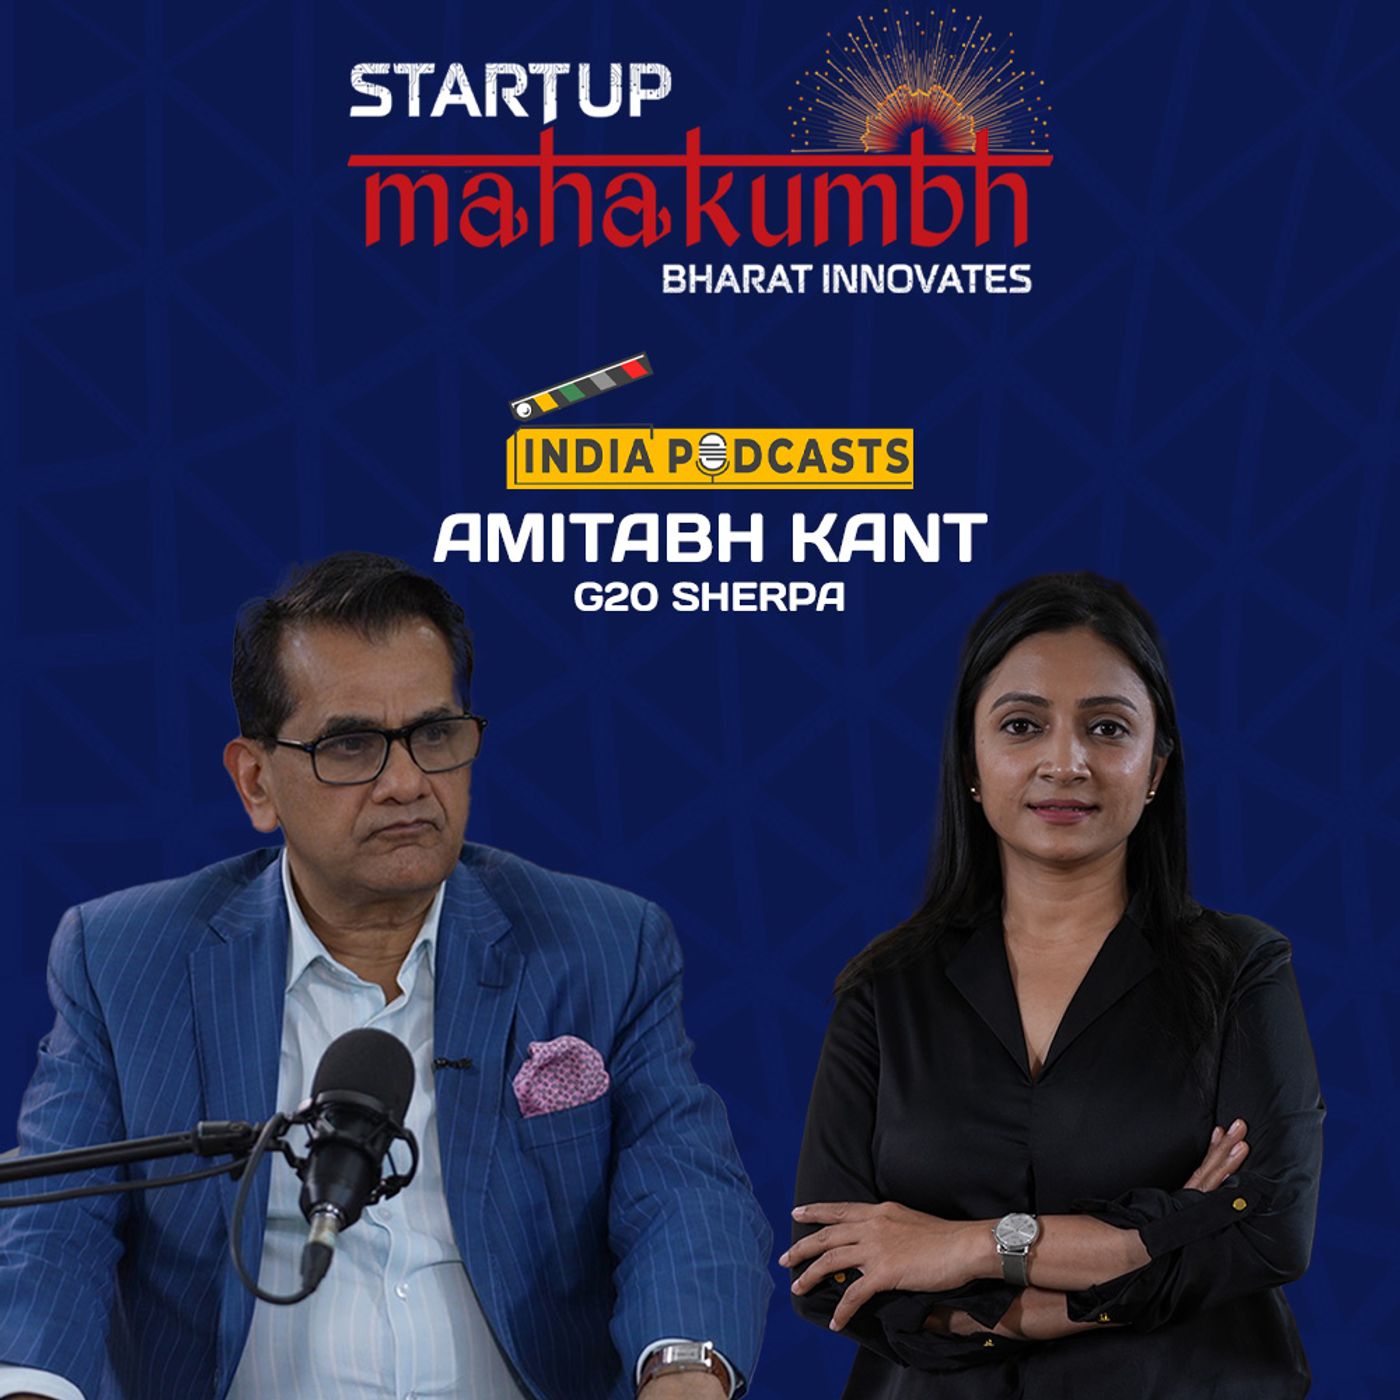 Momentum Is Set To Make India The Leading Startup Nation In The World: Amitabh Kant